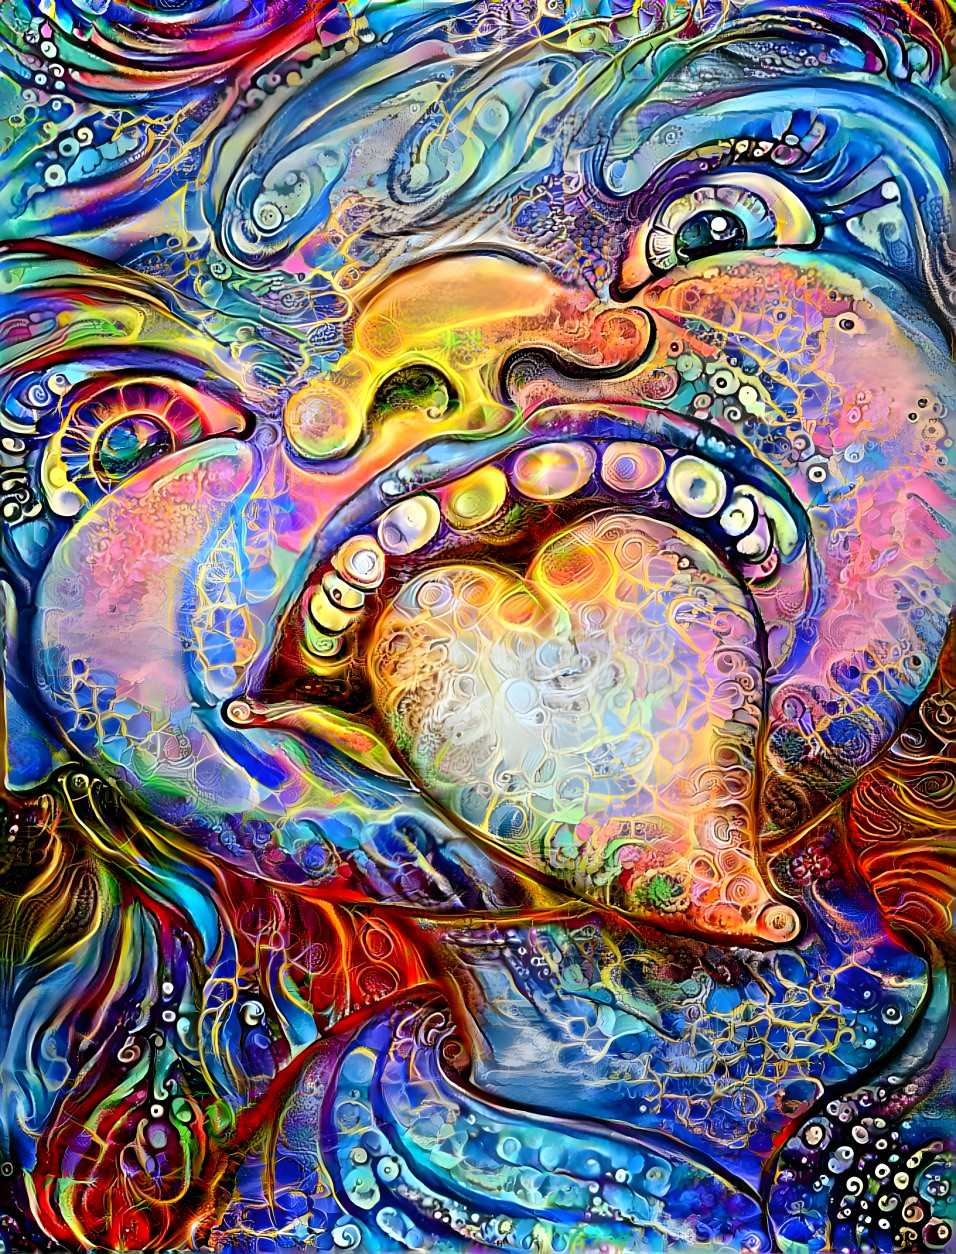 The heart on the tongue 